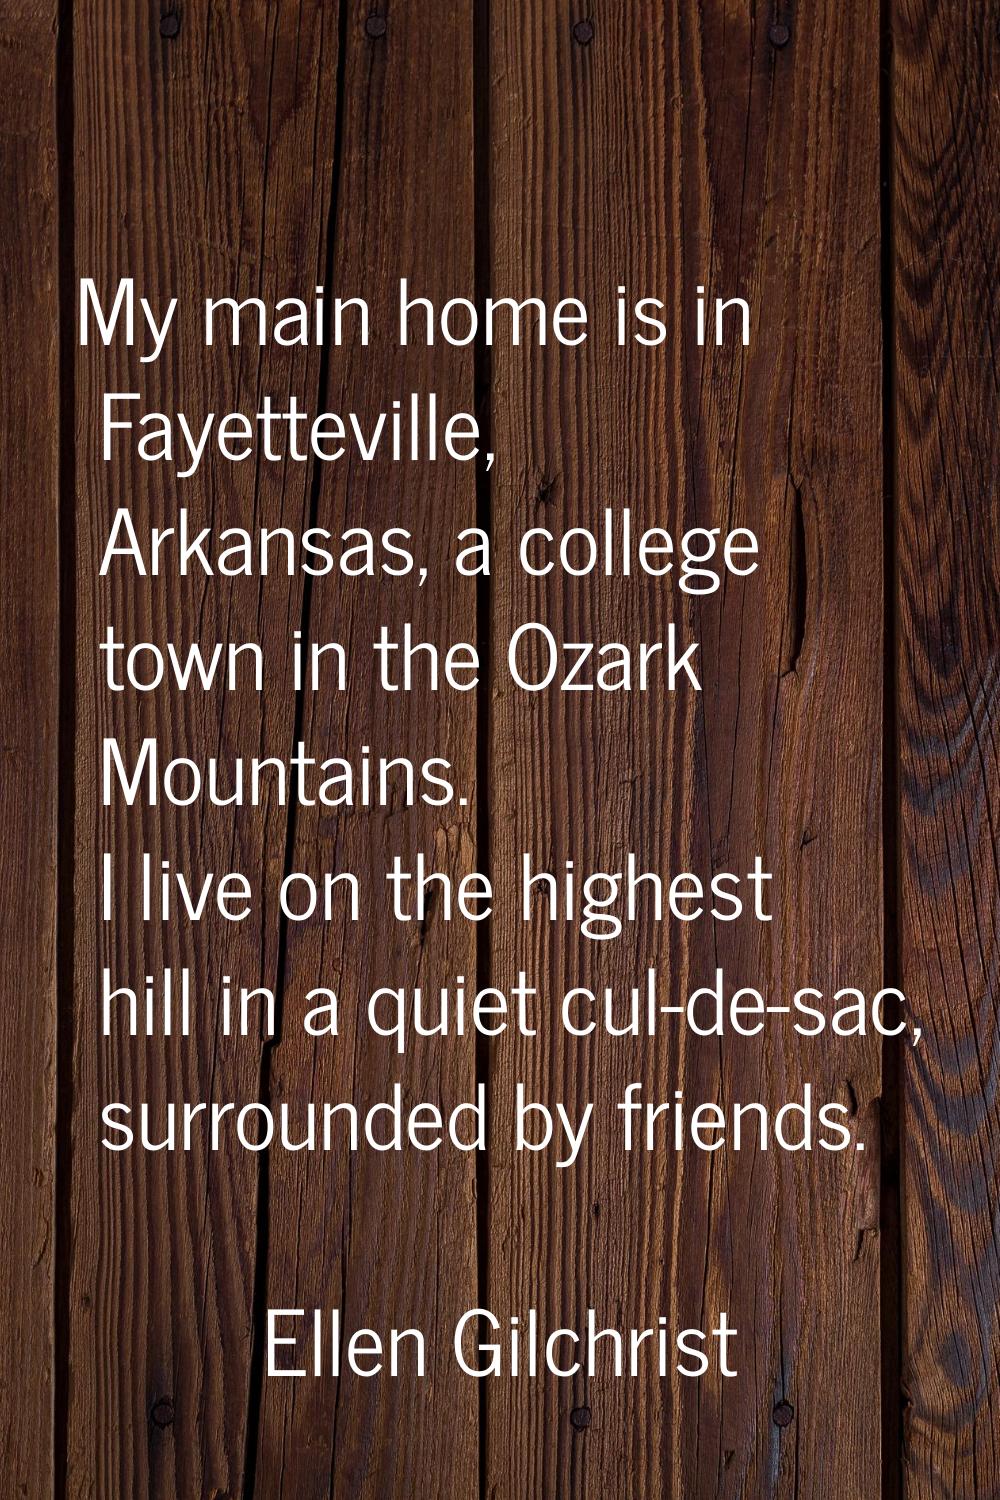 My main home is in Fayetteville, Arkansas, a college town in the Ozark Mountains. I live on the hig